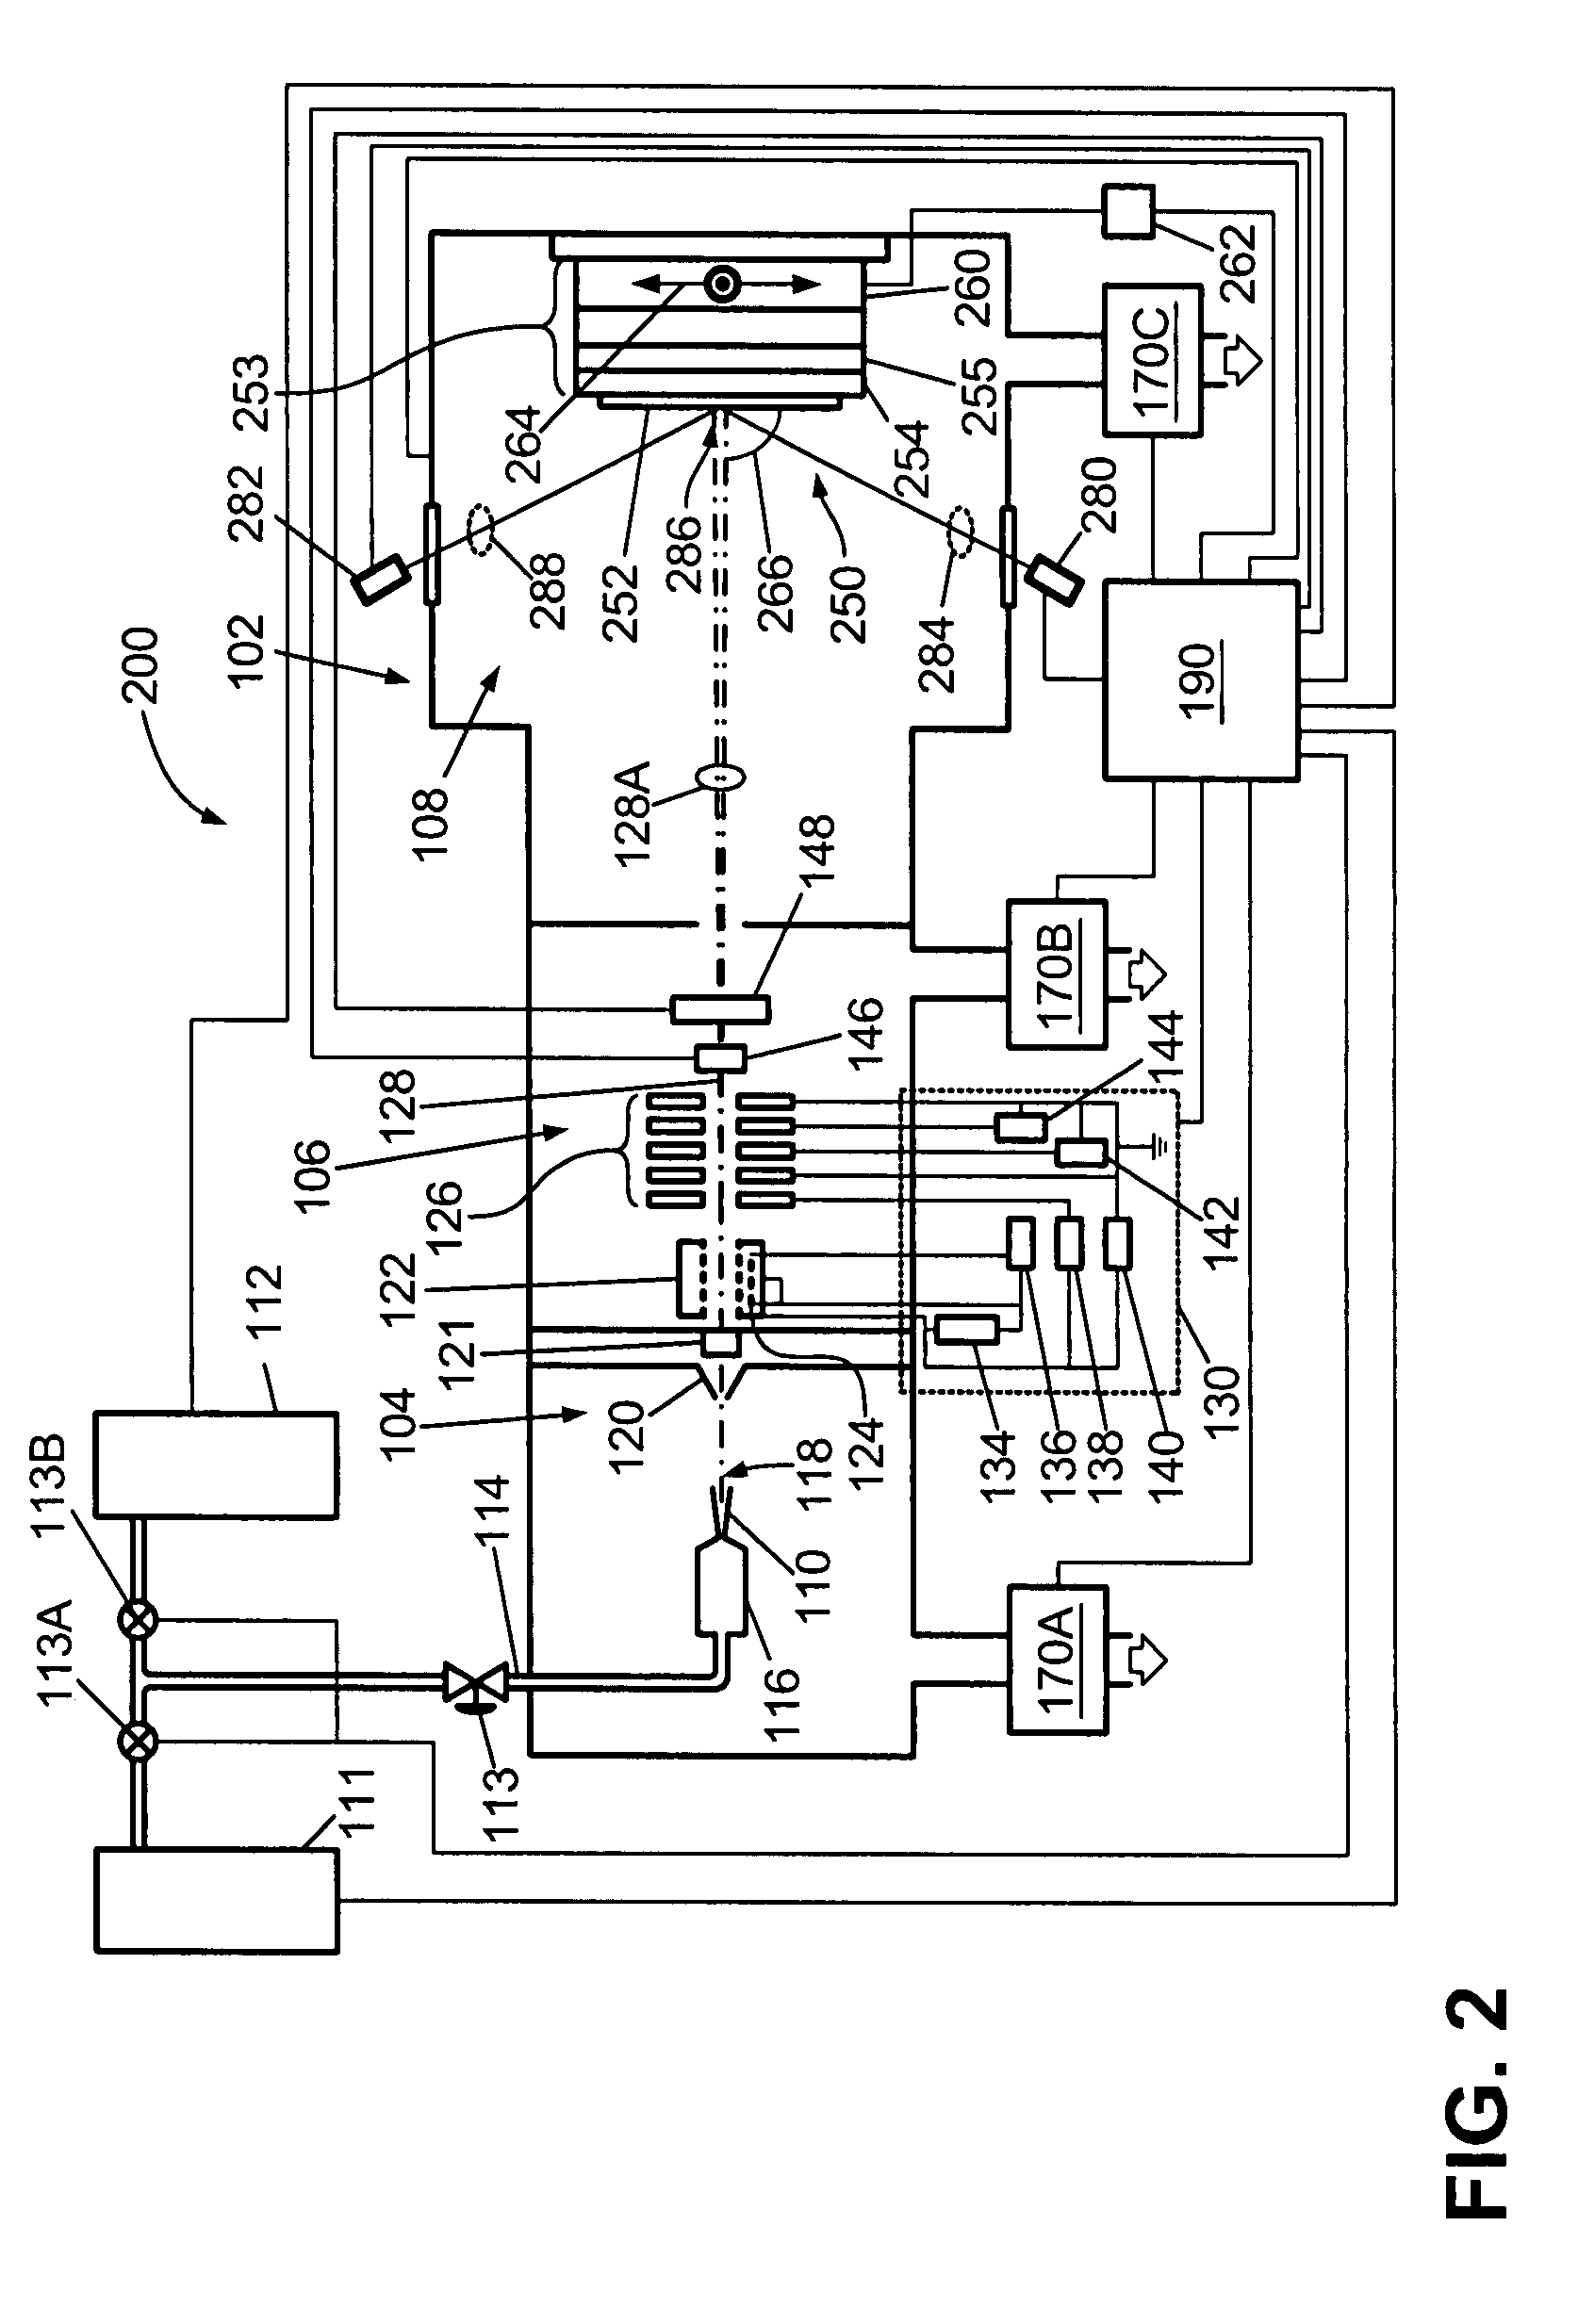 Method for depositing films using gas cluster ion beam processing